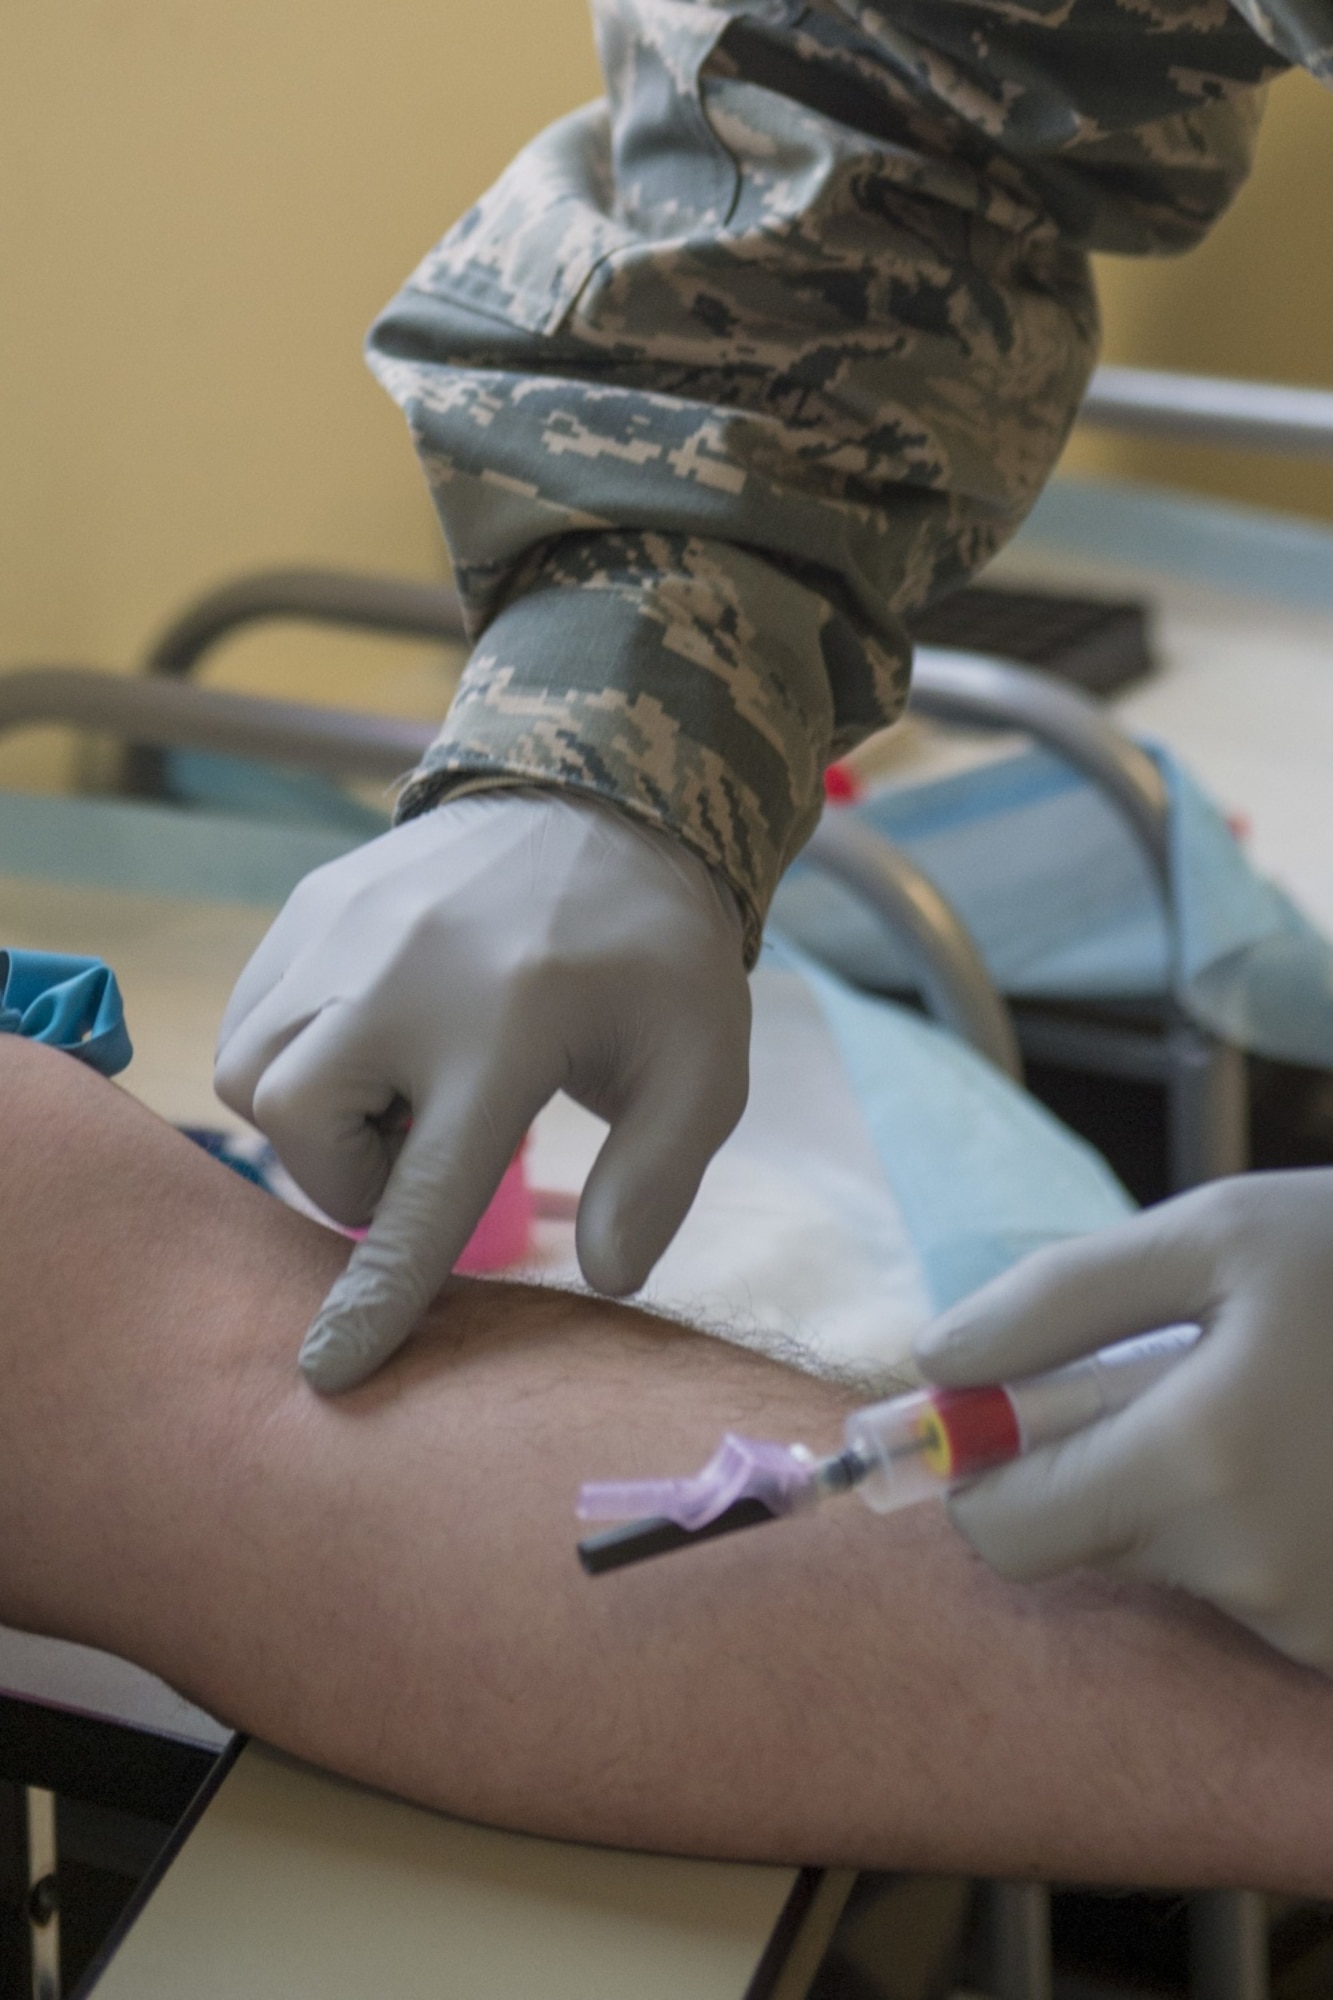 The 124th Medical Group hosted a pre-deployment medical processing line